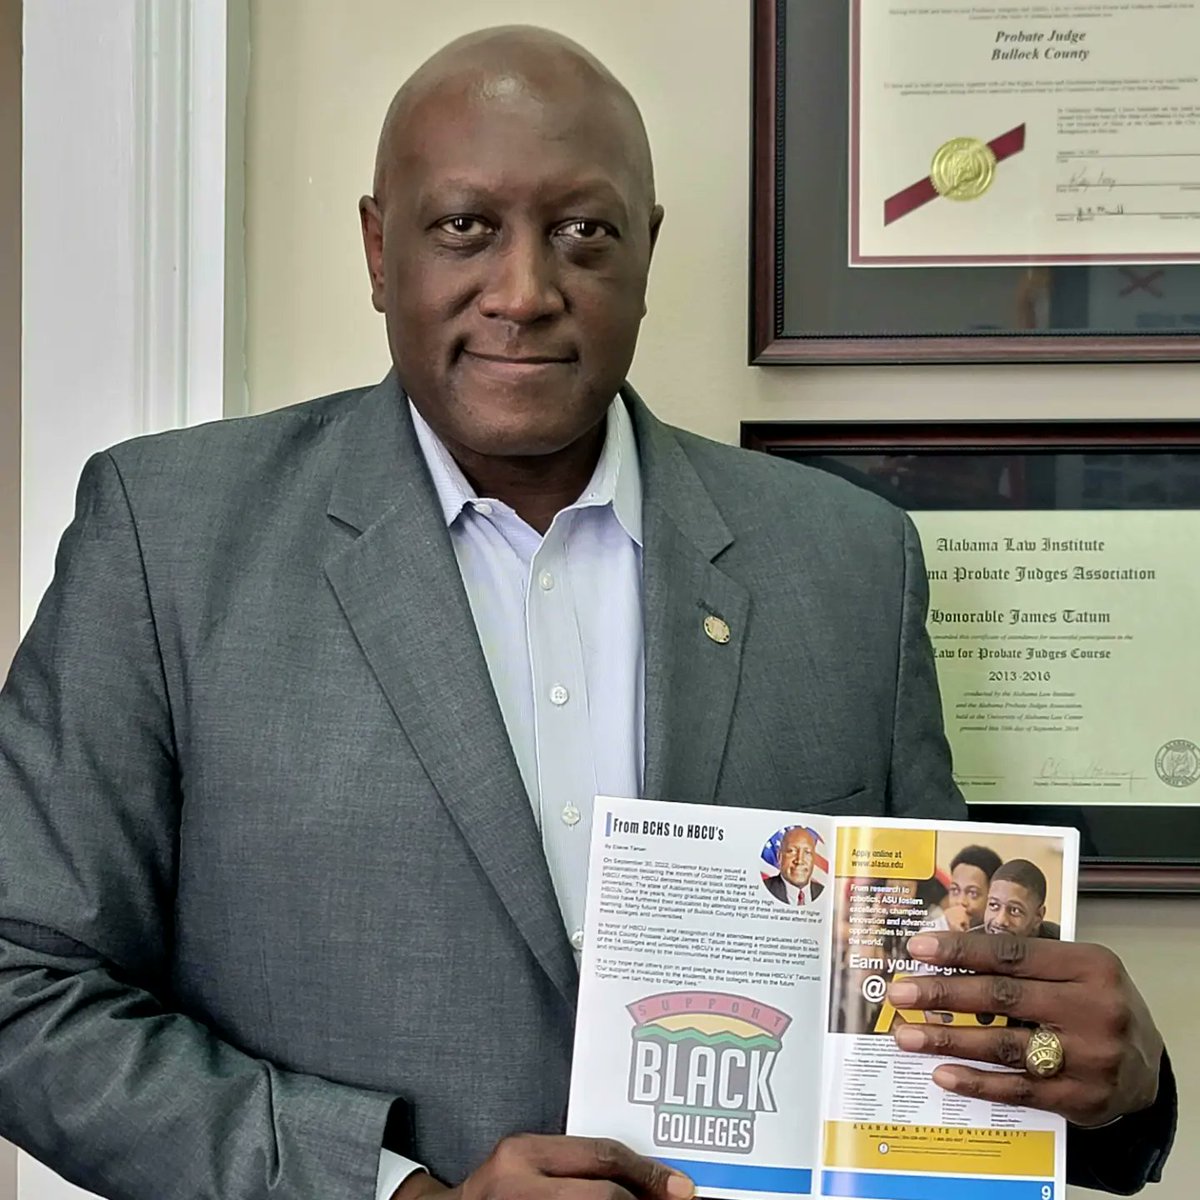 Thank you Bullock County Probate Judge James E Tatum for supporting Gumptown Magazine! Check out his article on page 8. #webeeverywhere #gumptown #mymgm #UnionSprings #bullockcounty #alabama #news #localnews